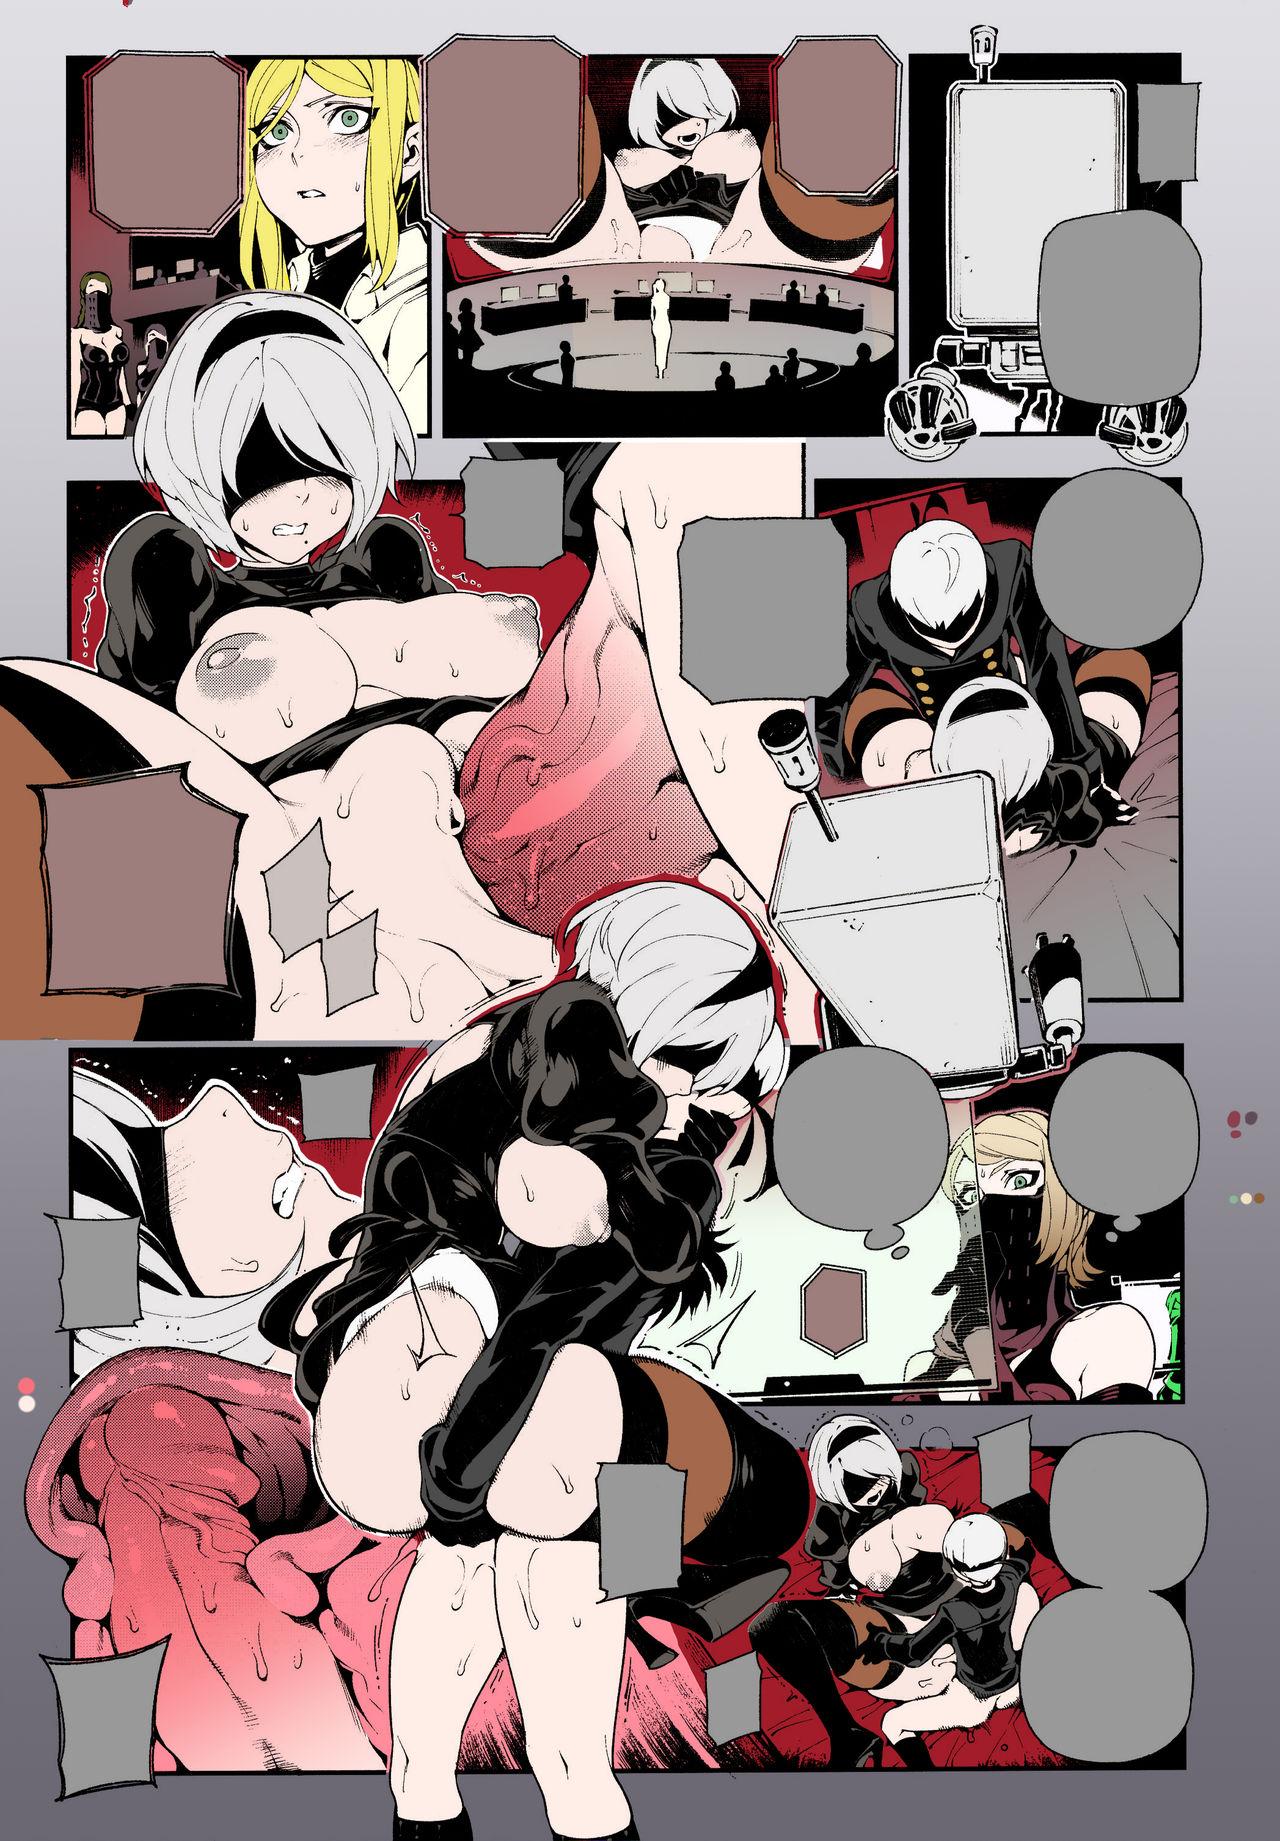 Hot Blow Jobs NieR : 2BR18 - Nier automata Livesex - Page 10